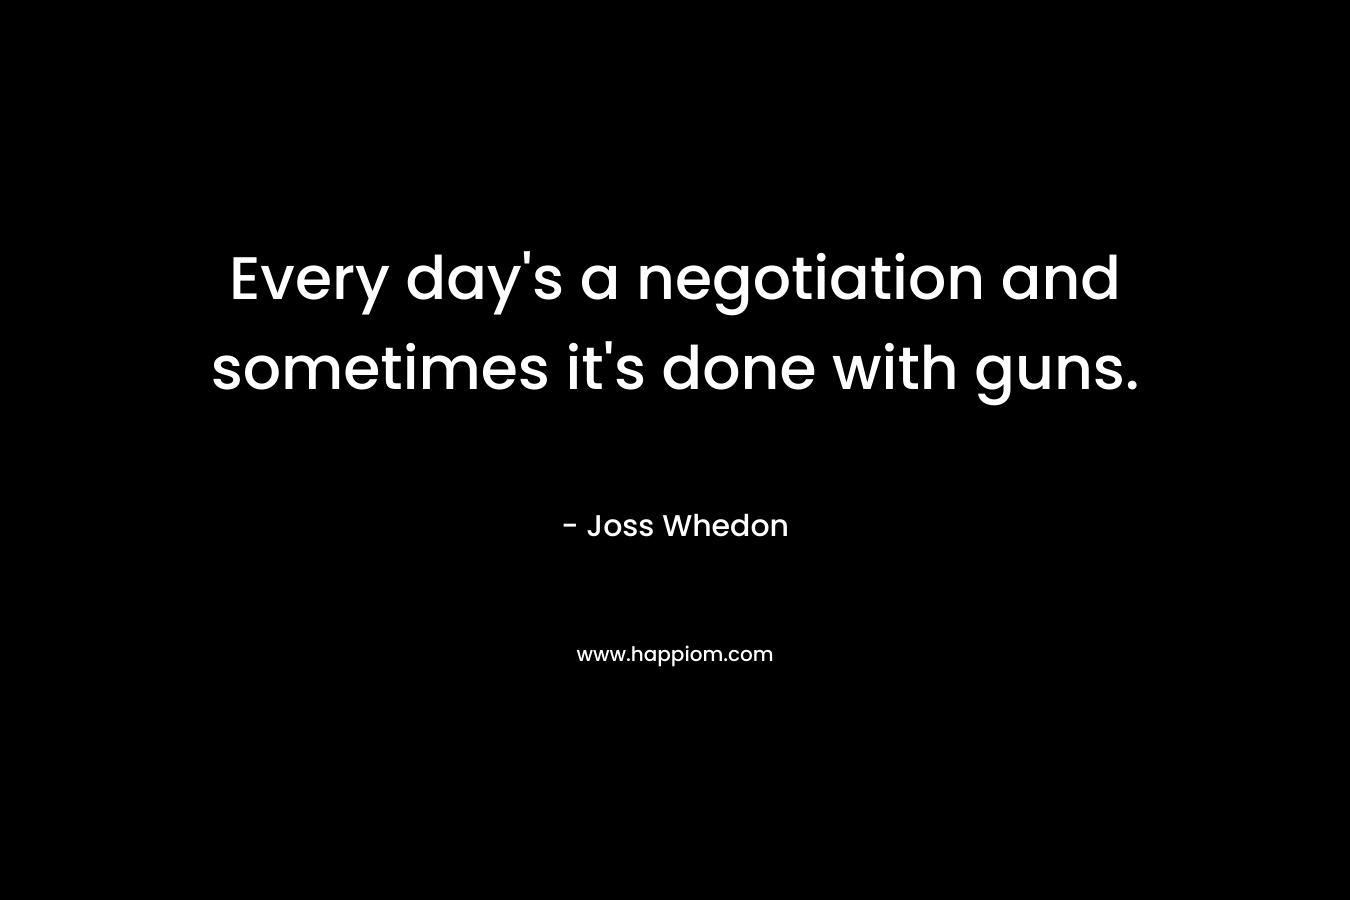 Every day’s a negotiation and sometimes it’s done with guns. – Joss Whedon